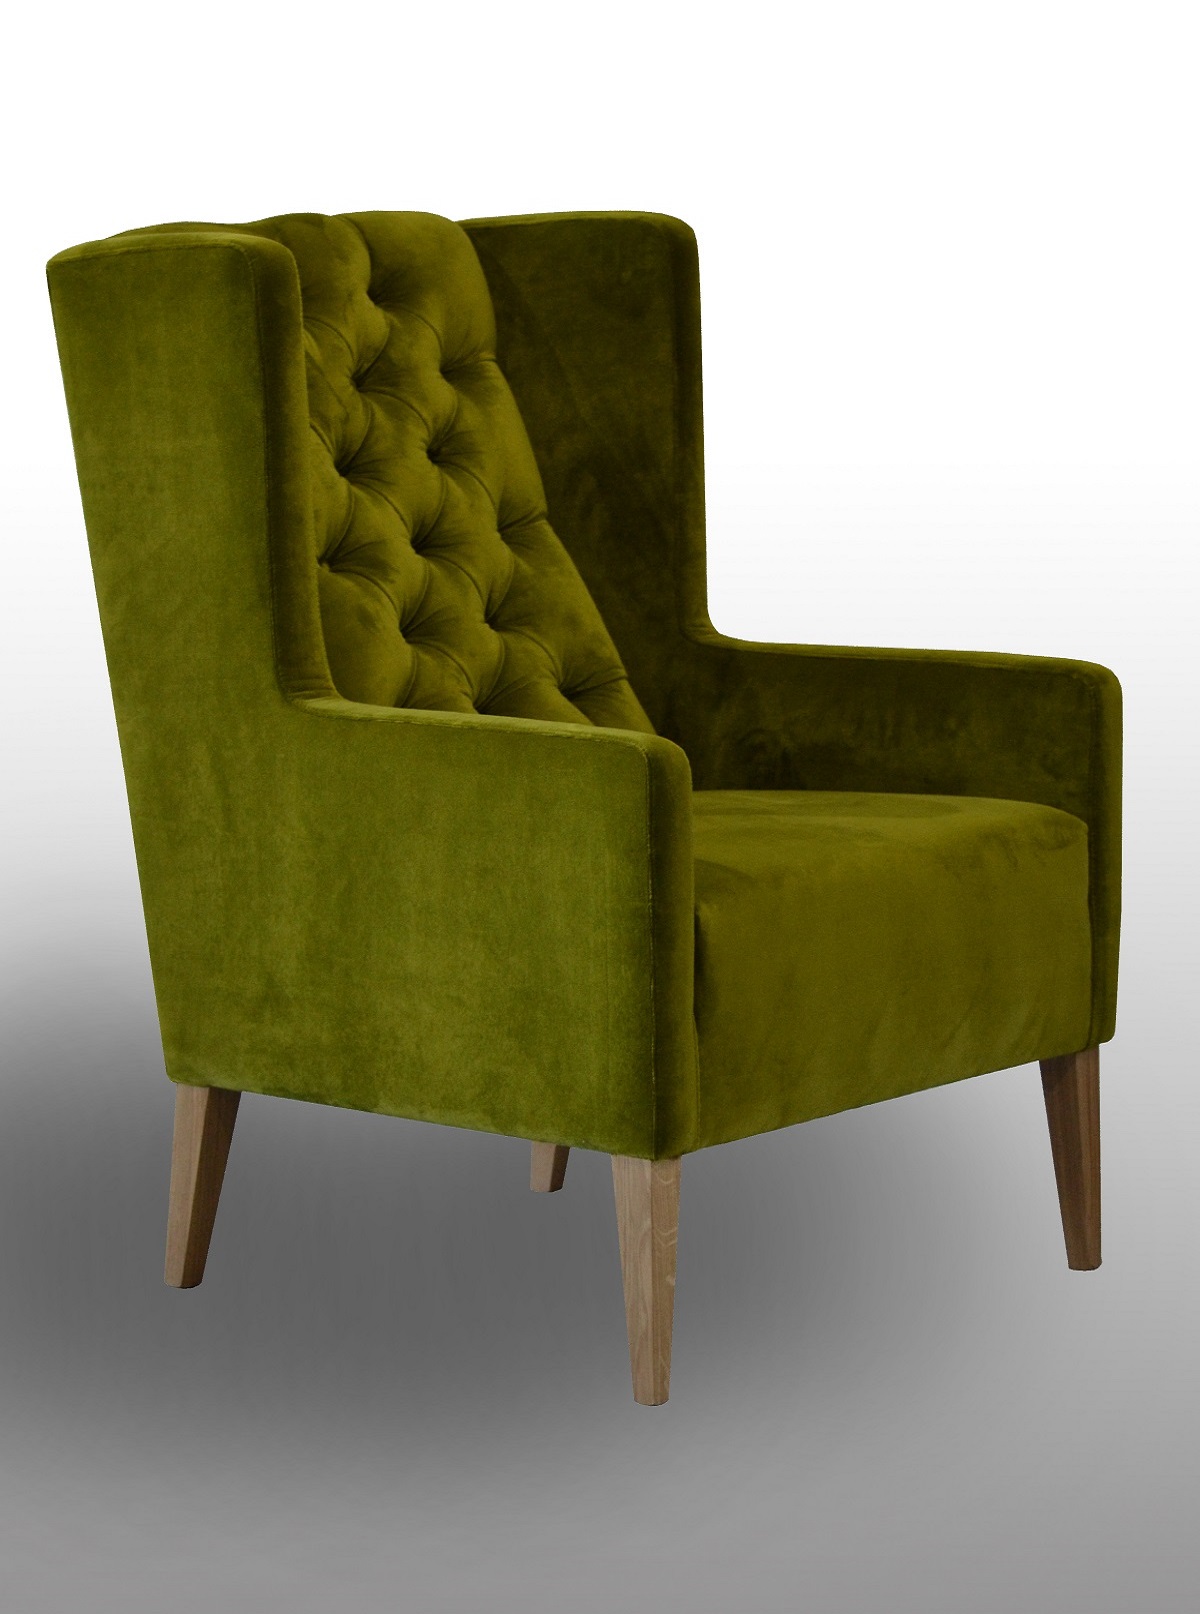 moss green deep buttoned chair by O'Donnell Design